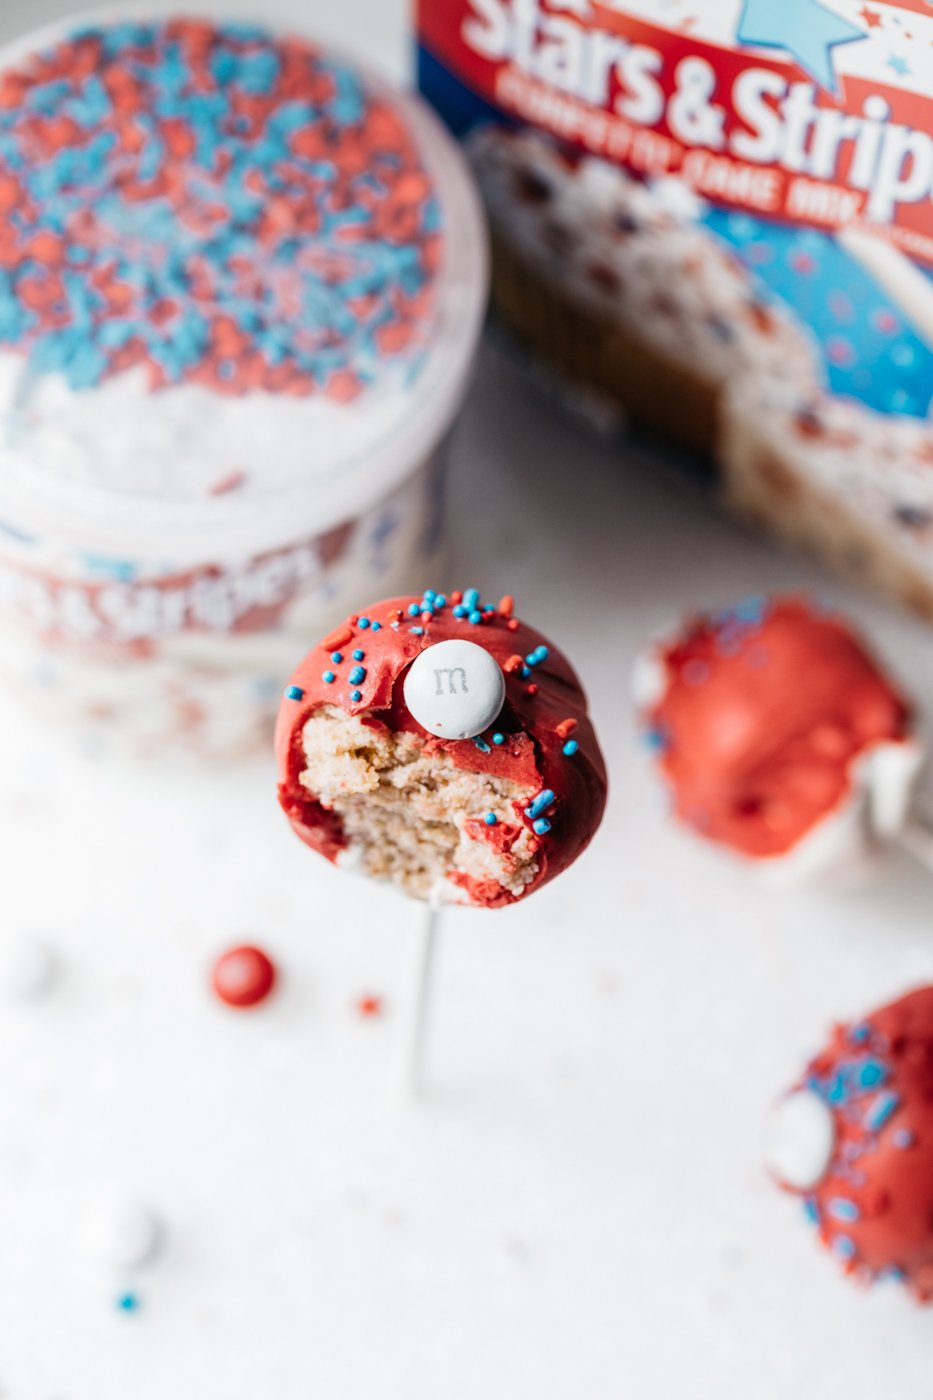 cupcake pops, cake pops recipe, pillsbury stars and stripes, 4th of july baking, the kentucky gent, southern cooking blog